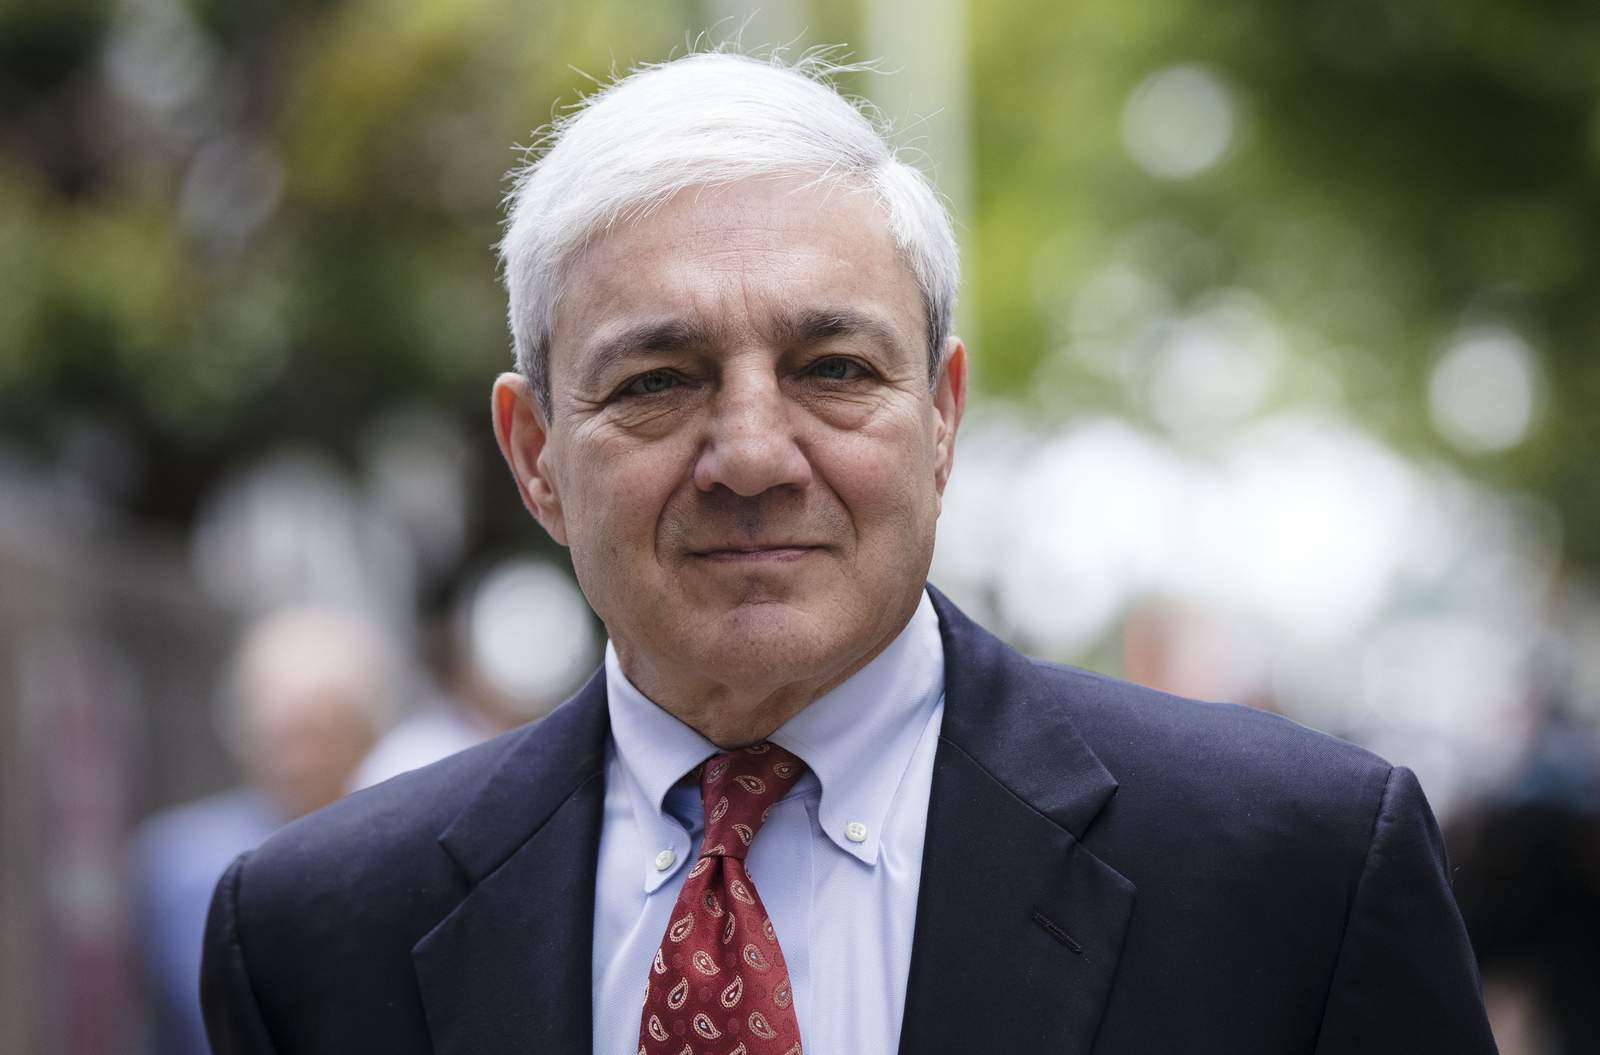 Penn State ex-president argues conviction properly tossed